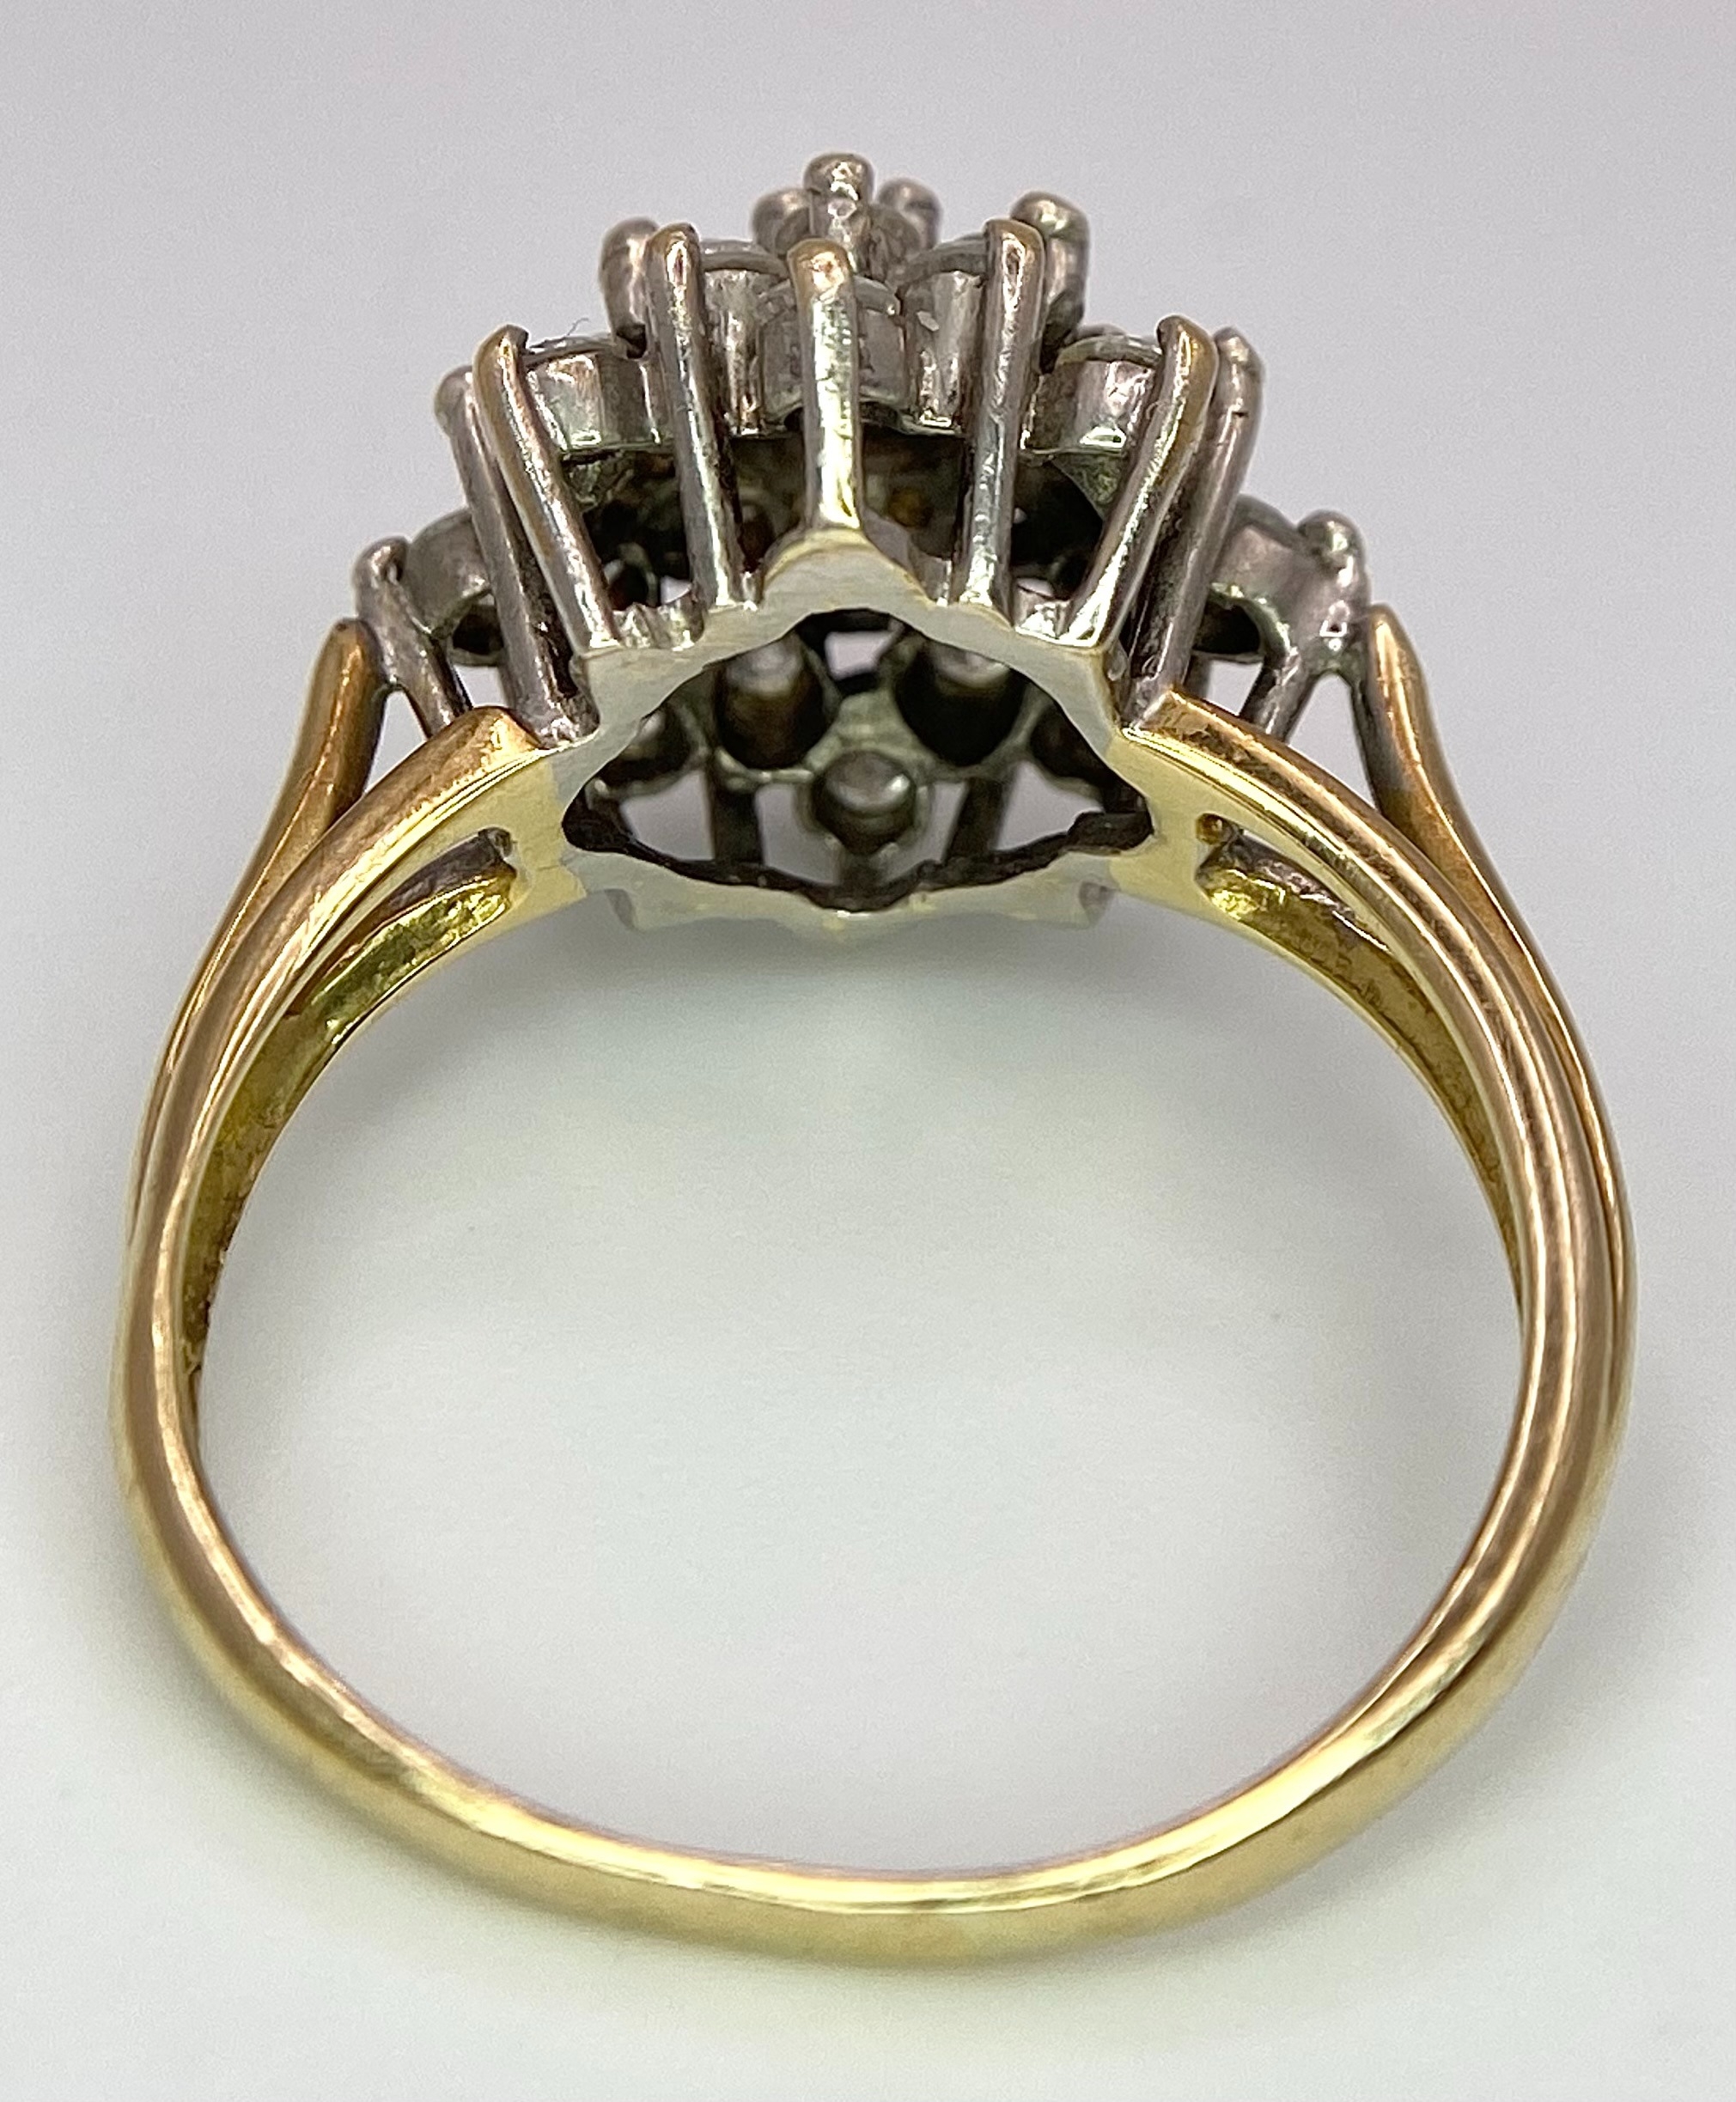 AN 18K YELLOW GOLD DIAMOND CLUSTER RING - 1CTW. 4.2G. SIZE L 1/2. - Image 4 of 7